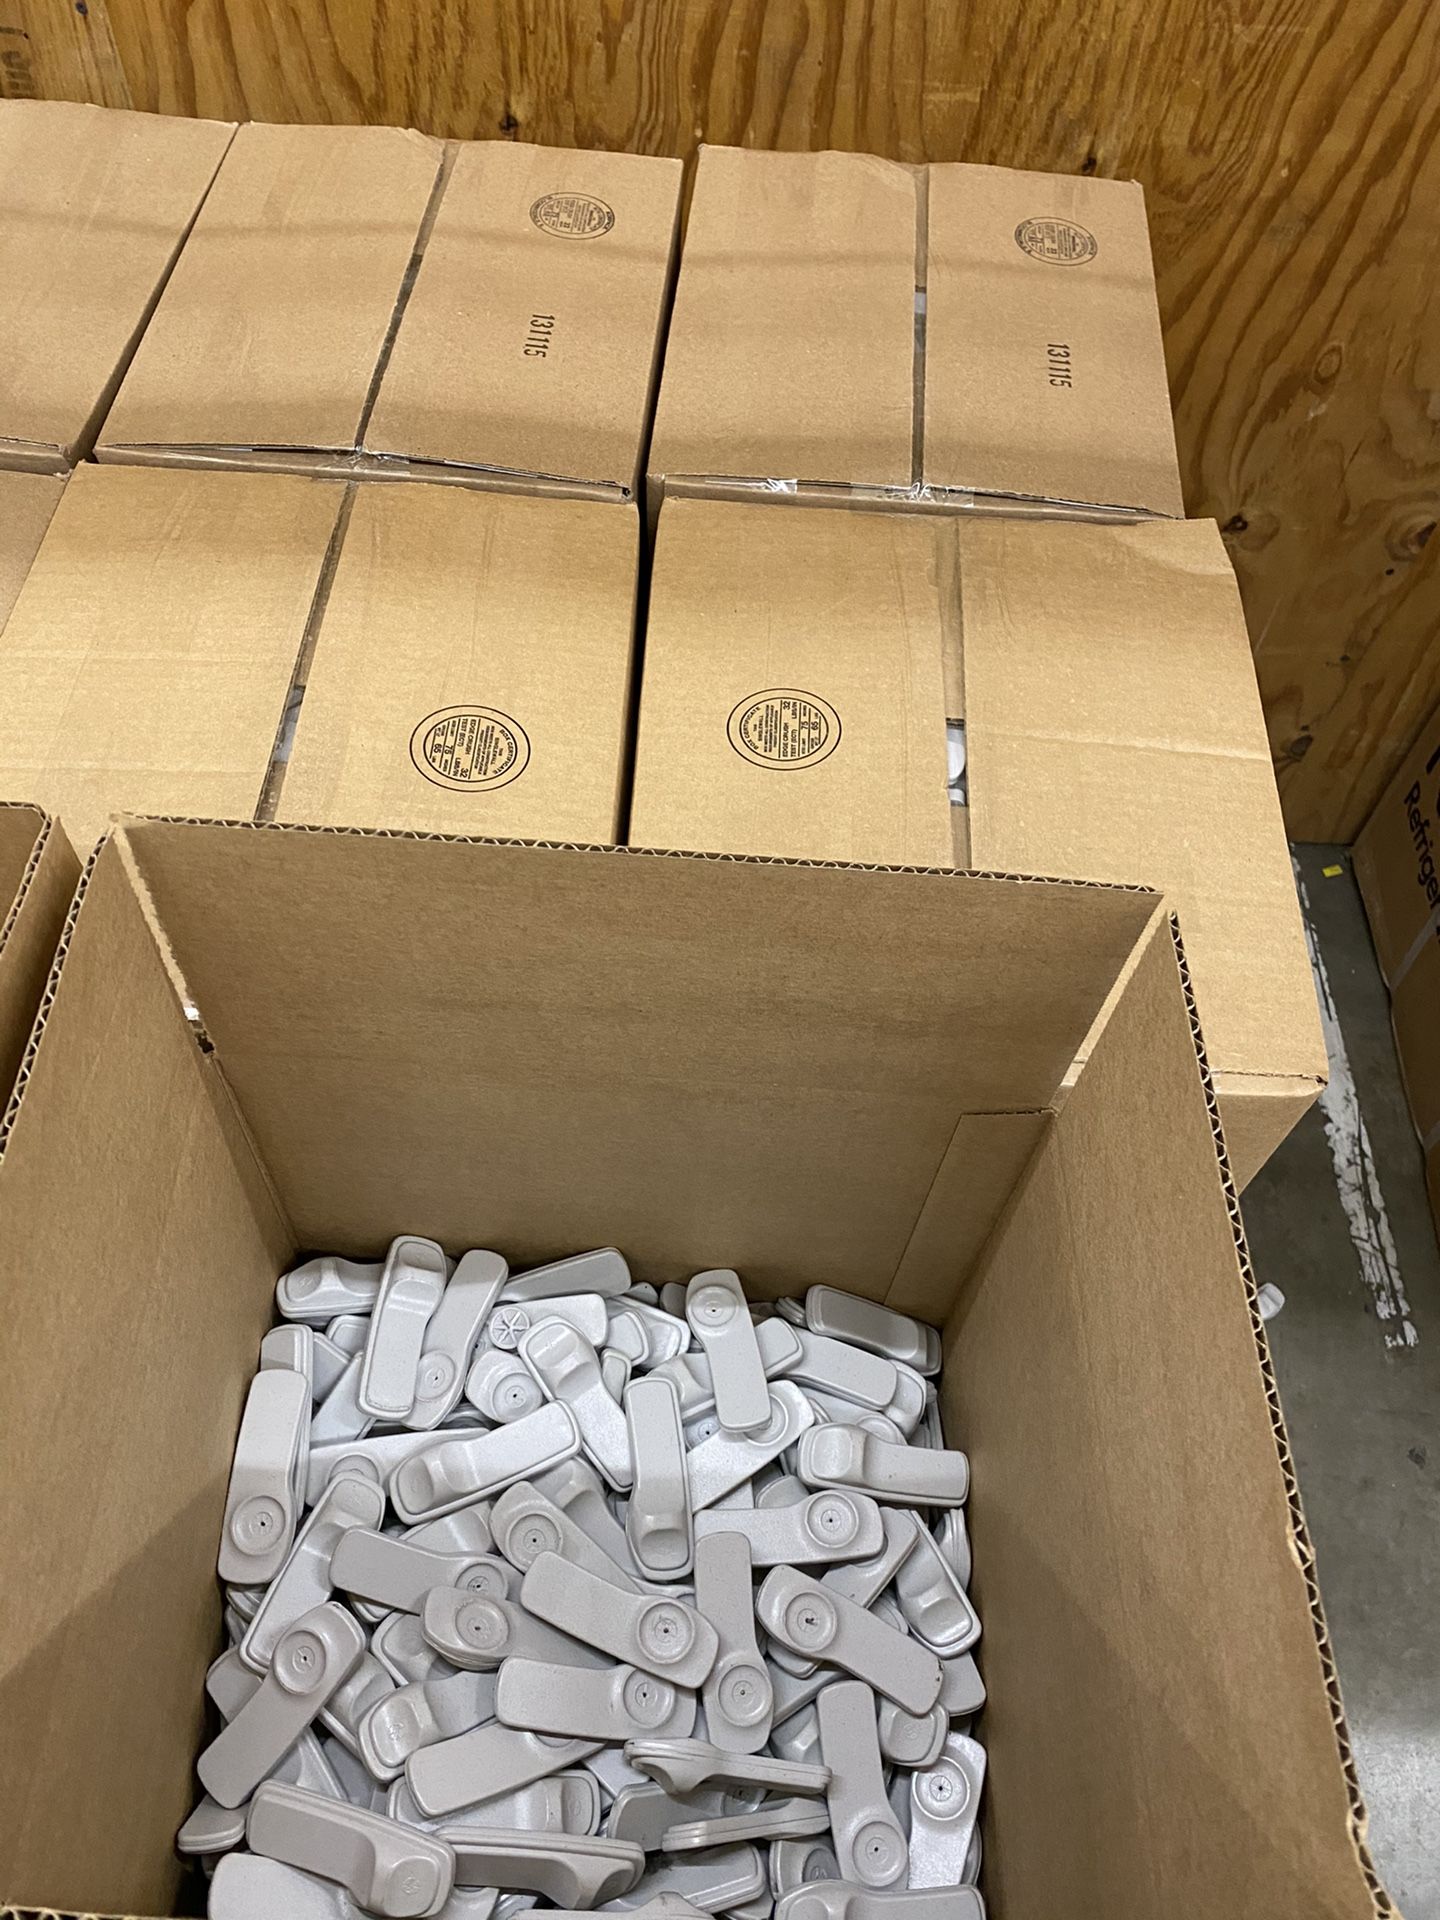 Pallets of clothing security tags